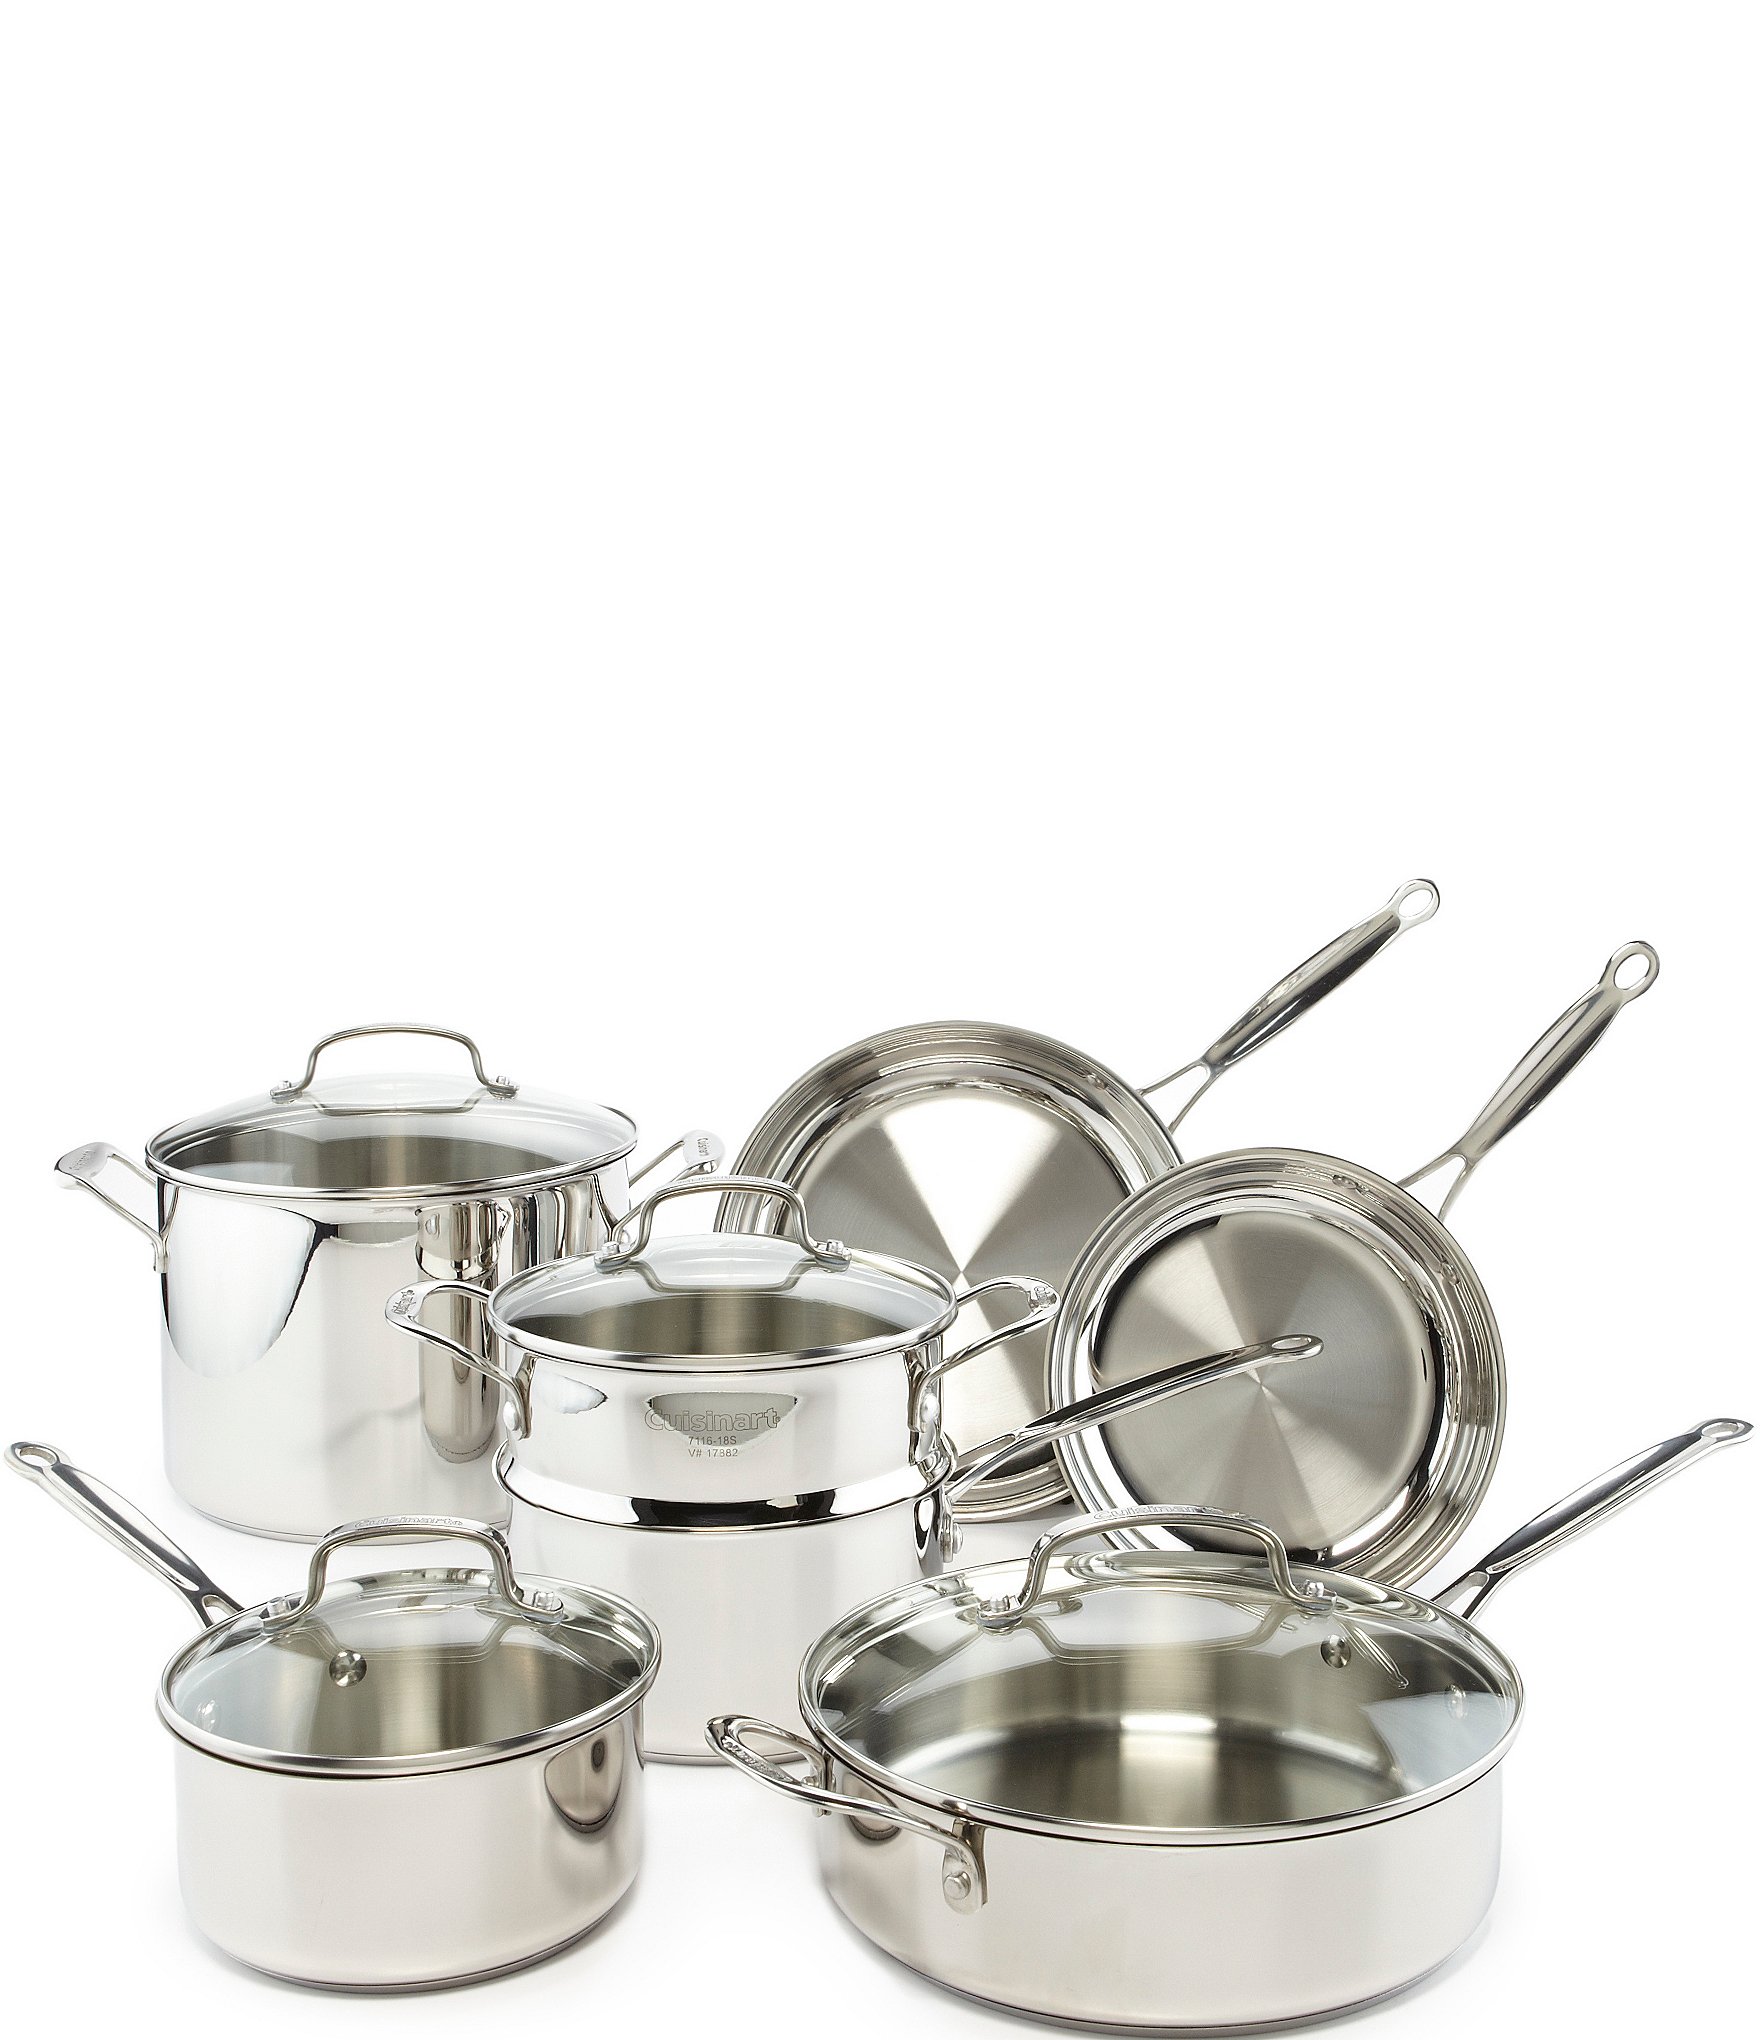 Cuisinart Chef's Classic Stainless Steel 11-Piece Cookware Set | Dillards Cuisinart Stainless Steel Pan Set